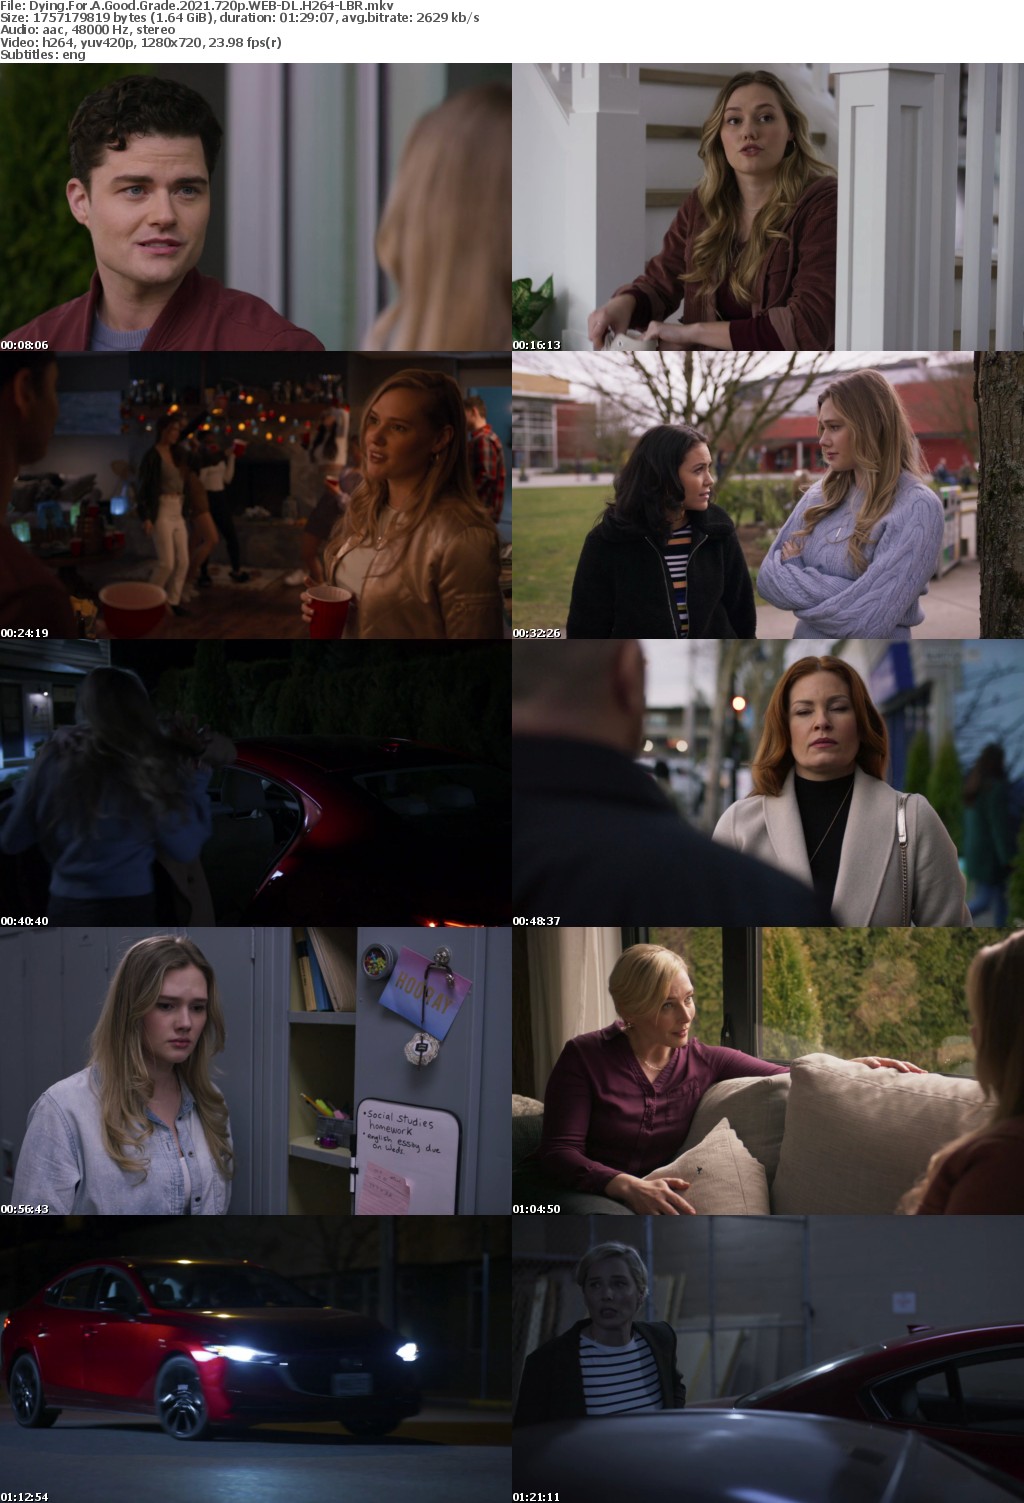 Dying For A Good Grade 2021 720p WEB-DL H264-LBR